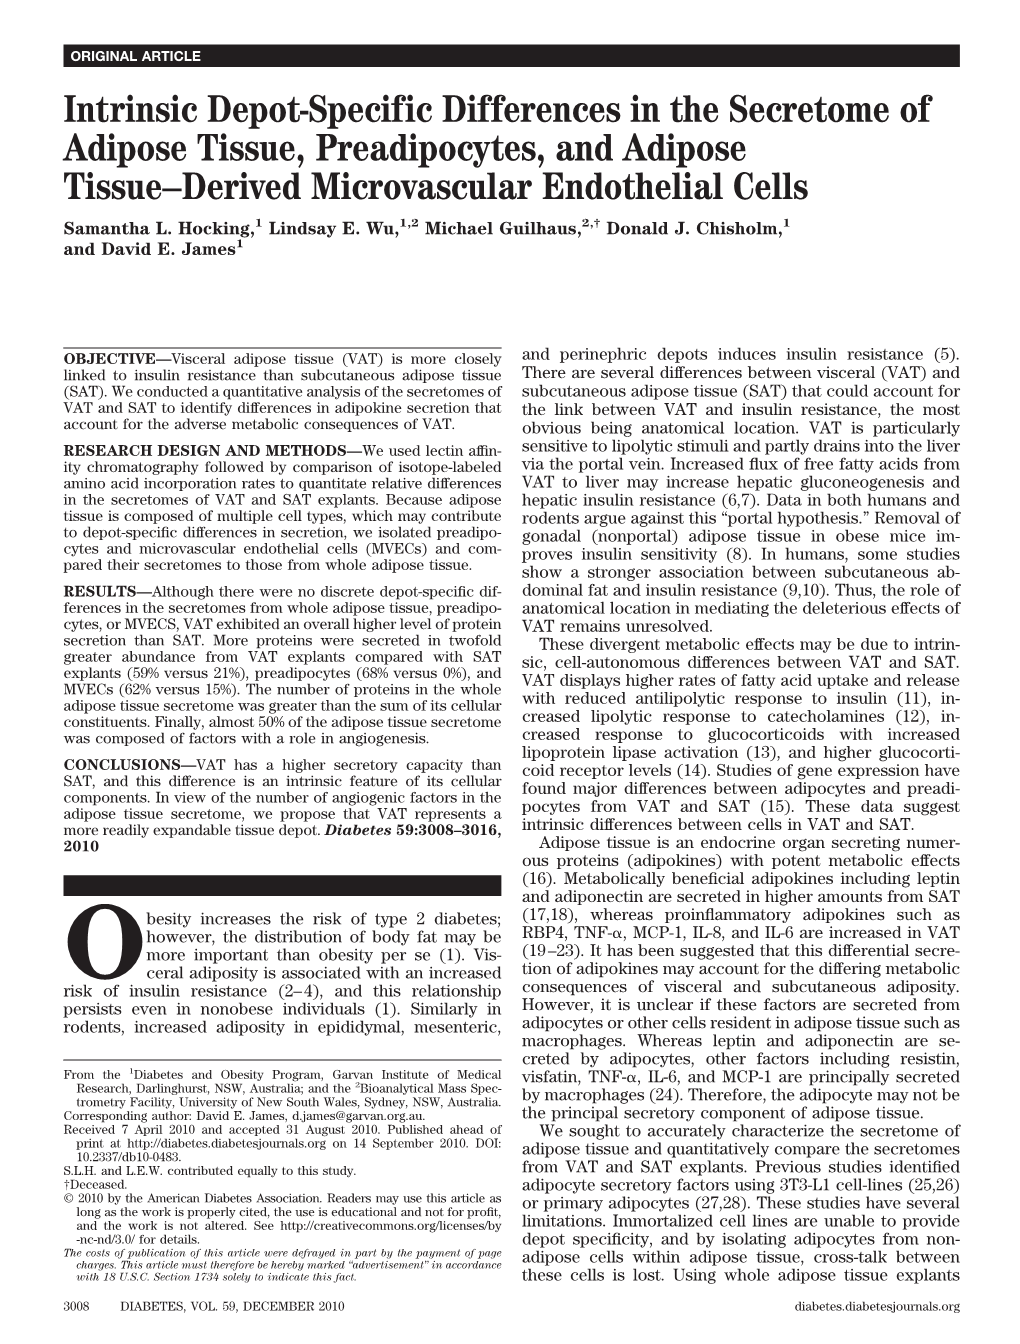 Intrinsic Depot-Specific Differences in the Secretome of Adipose Tissue, Preadipocytes, and Adipose Tissue–Derived Microvascular Endothelial Cells Samantha L